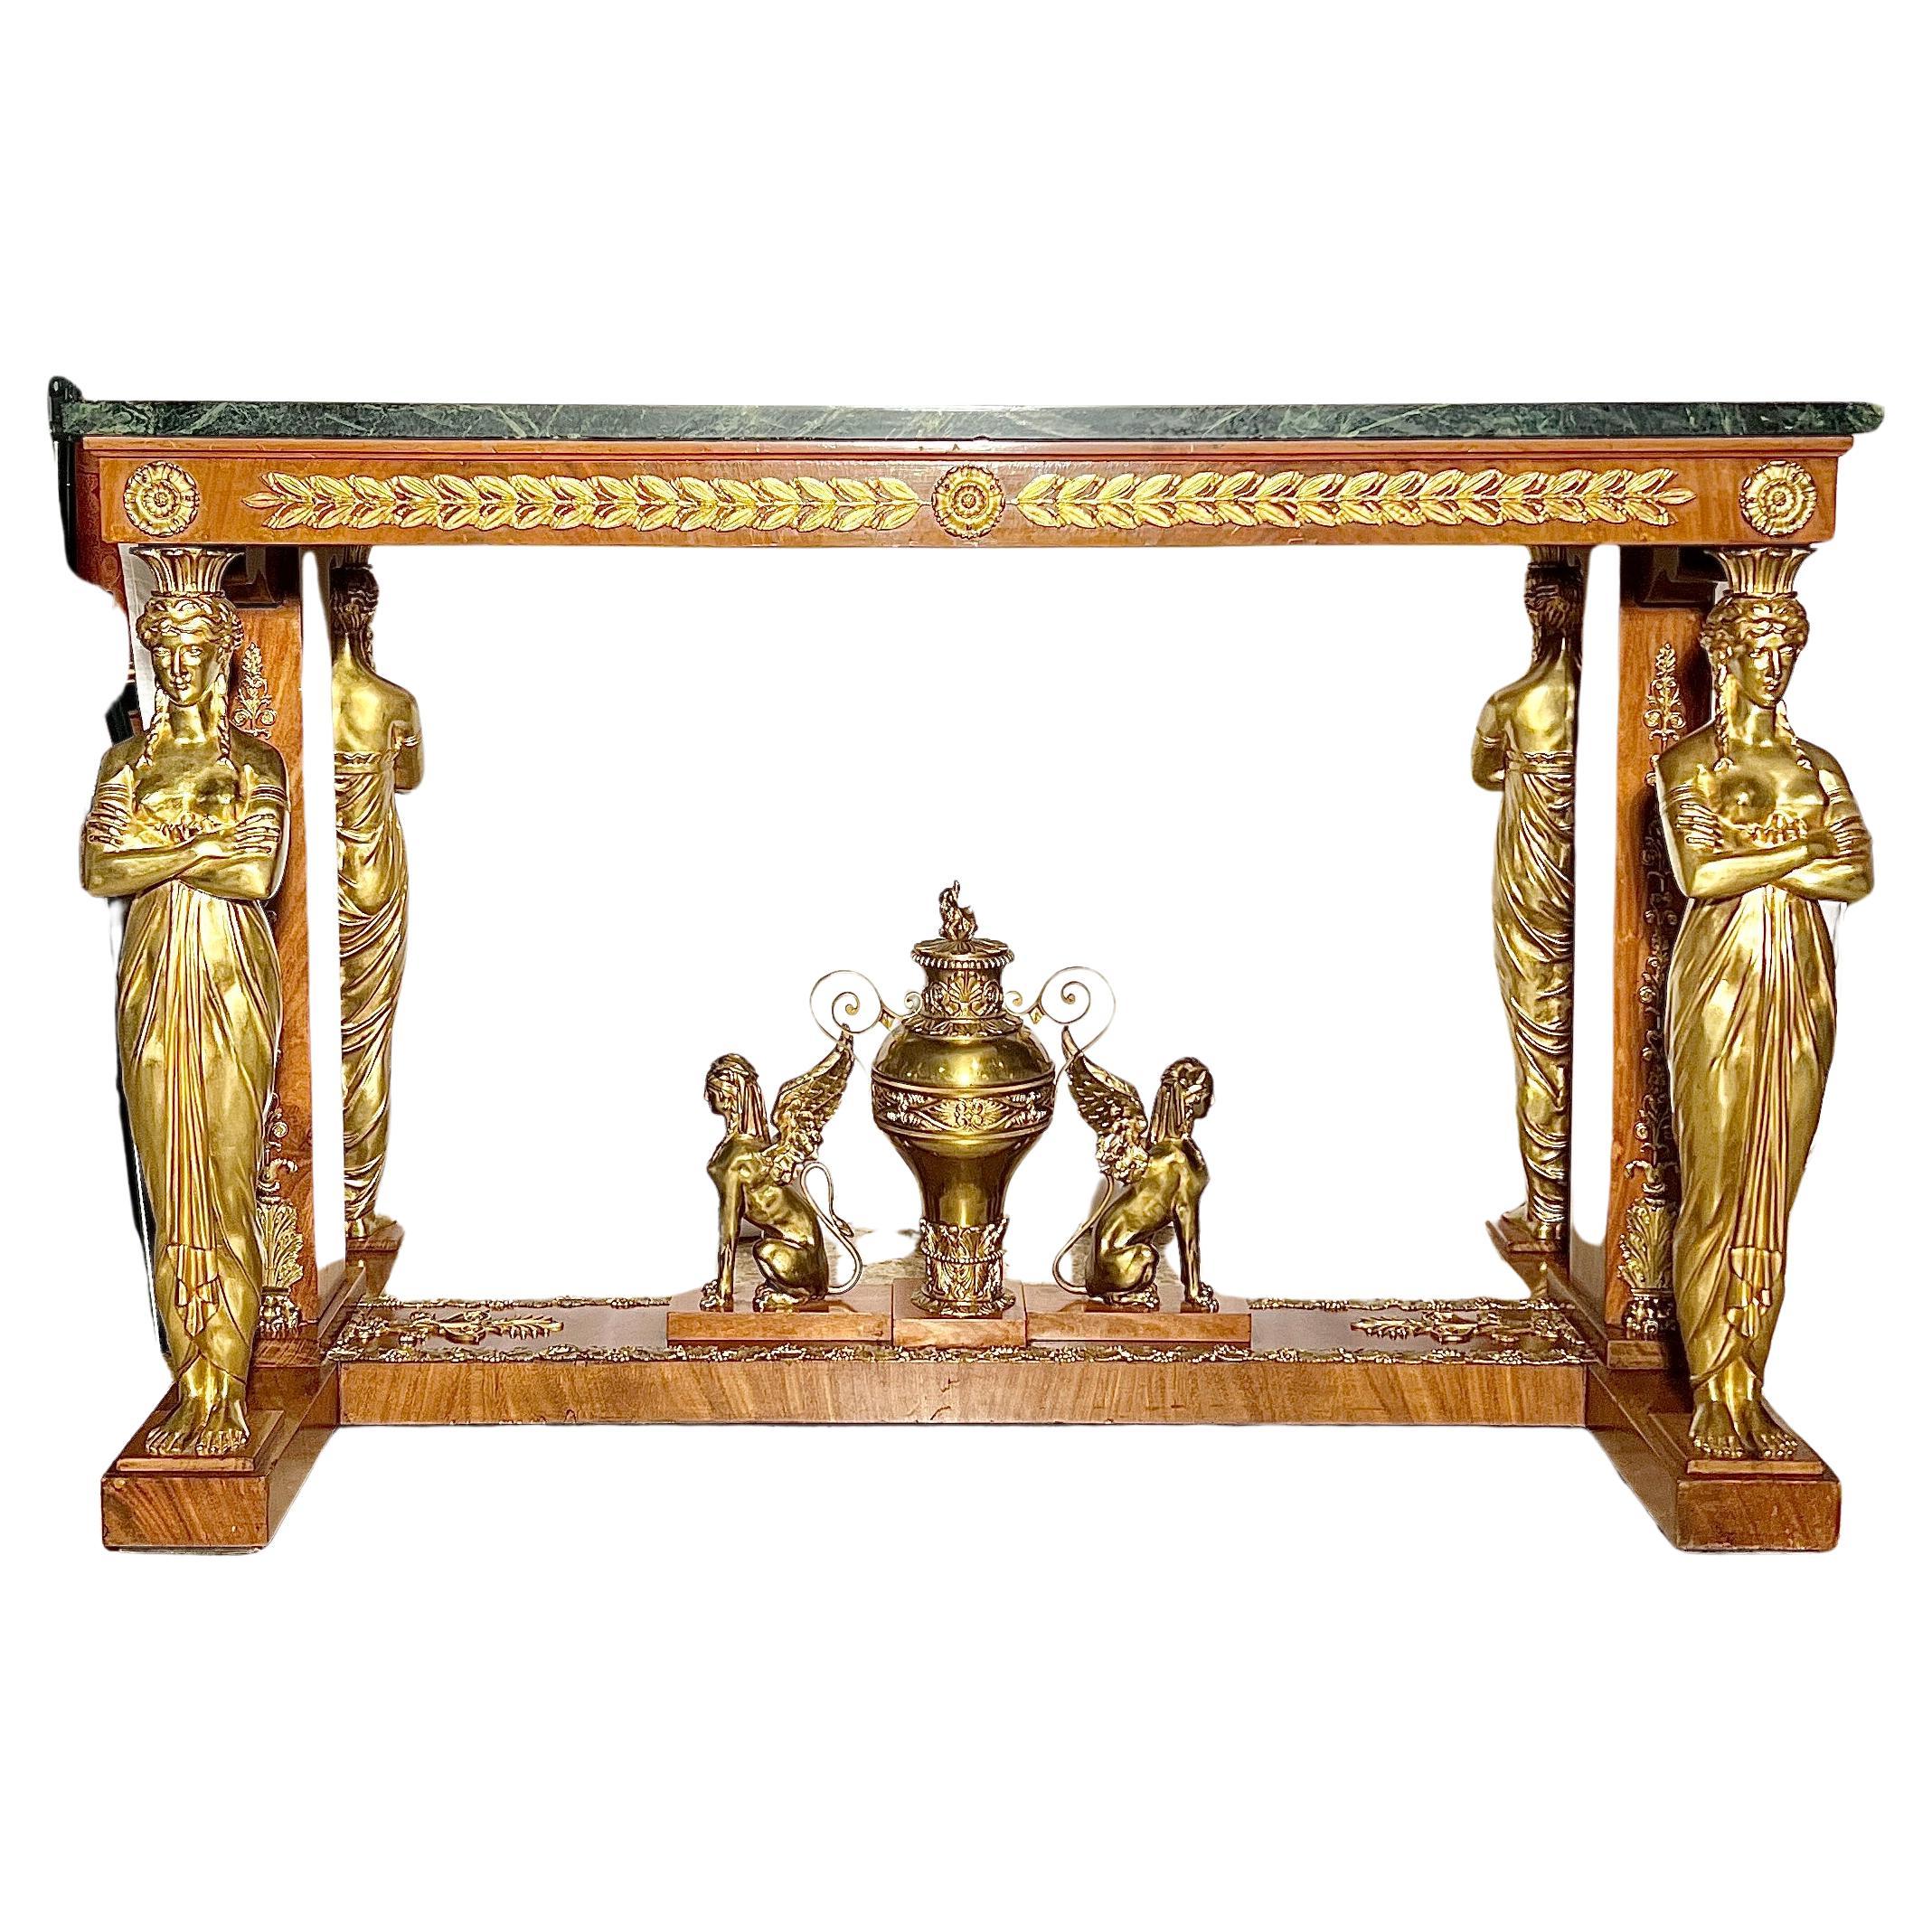 Magnificent Antique French Empire Gilt Bronze & Mahogany Marble Top Center Table, Circa 1880. 
After Jacob Desmalter.
The Grand Trianon Versailles Original was made in 1808 for Caroline Murat (Napoleon's Youngest Sister)